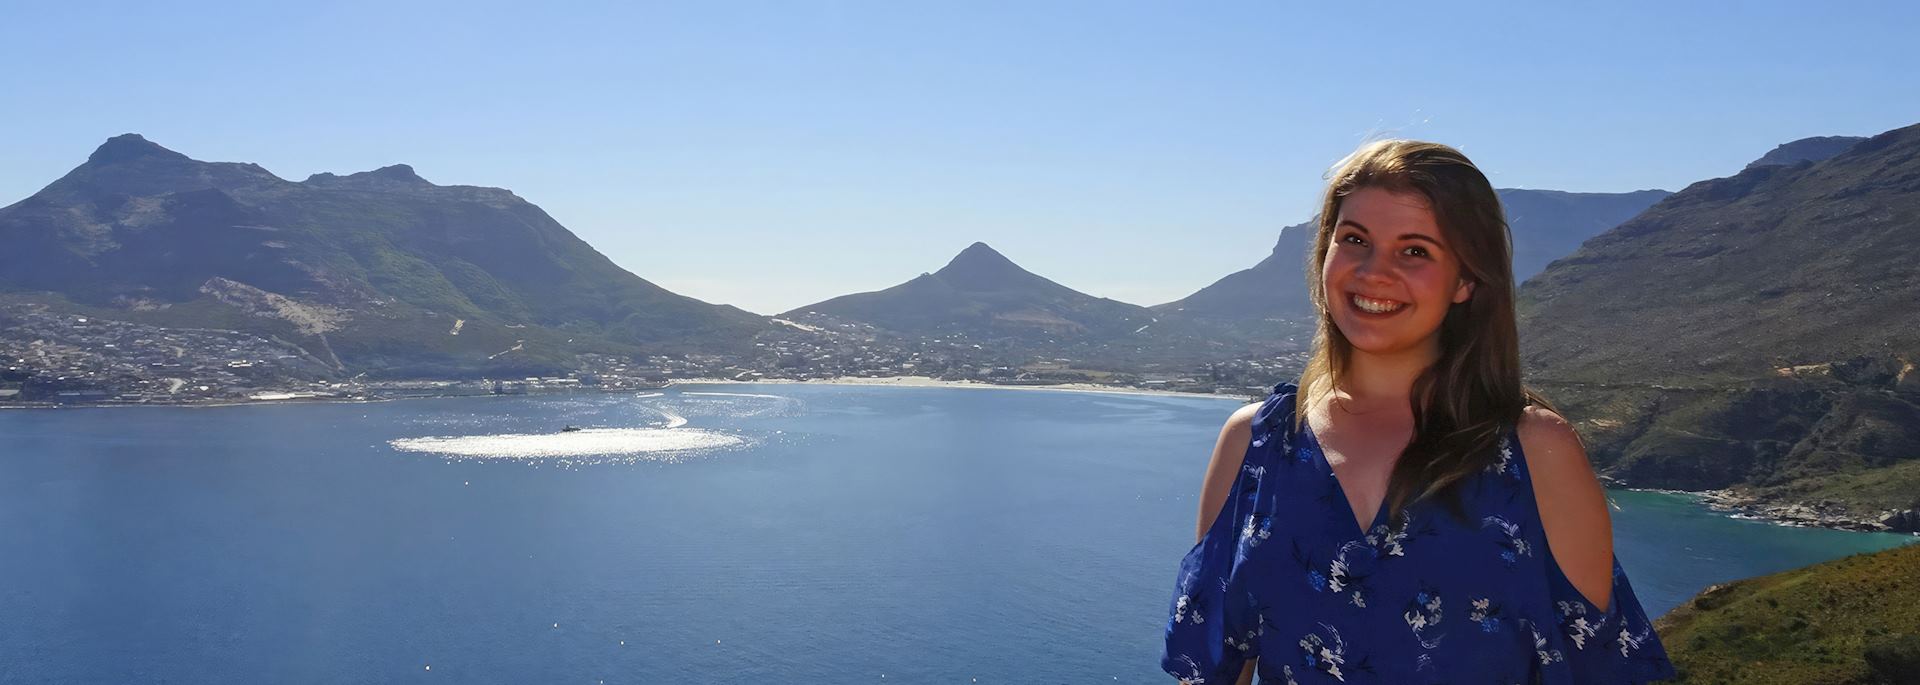  Kirsty visiting Hout Bay, South Africa